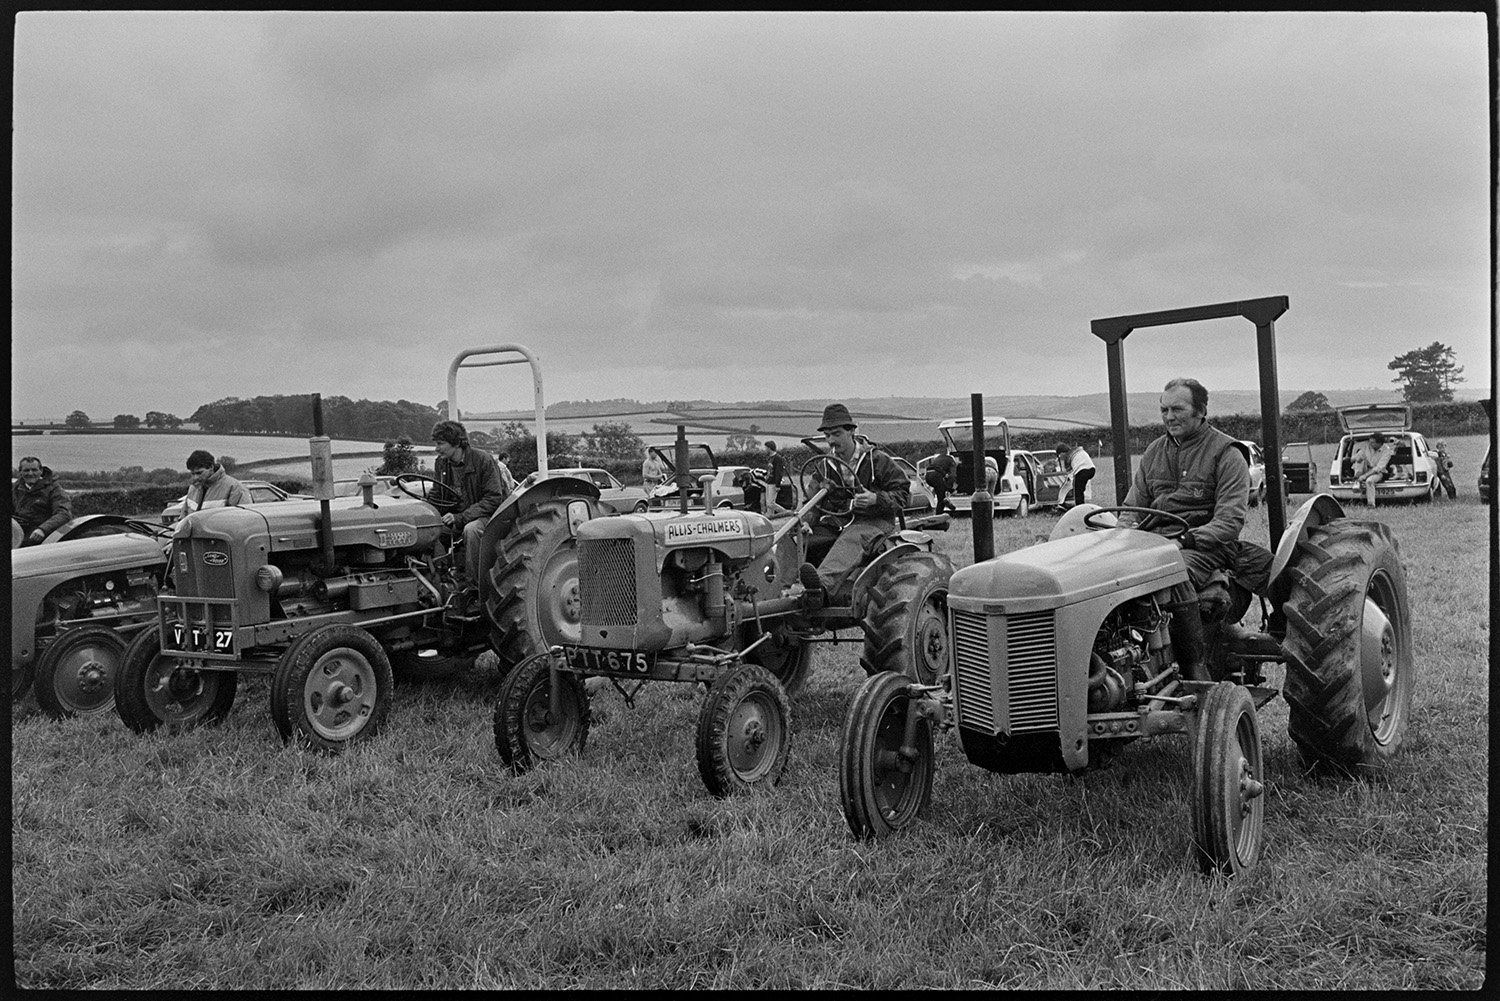 Village Club Day, sports, teas clay pigeon shoot, committee in discussion.
[A row of vintage tractors with their drivers lined up during a Village Club Day at Chawleigh. There are visitors with their cars, and fields in the background.]